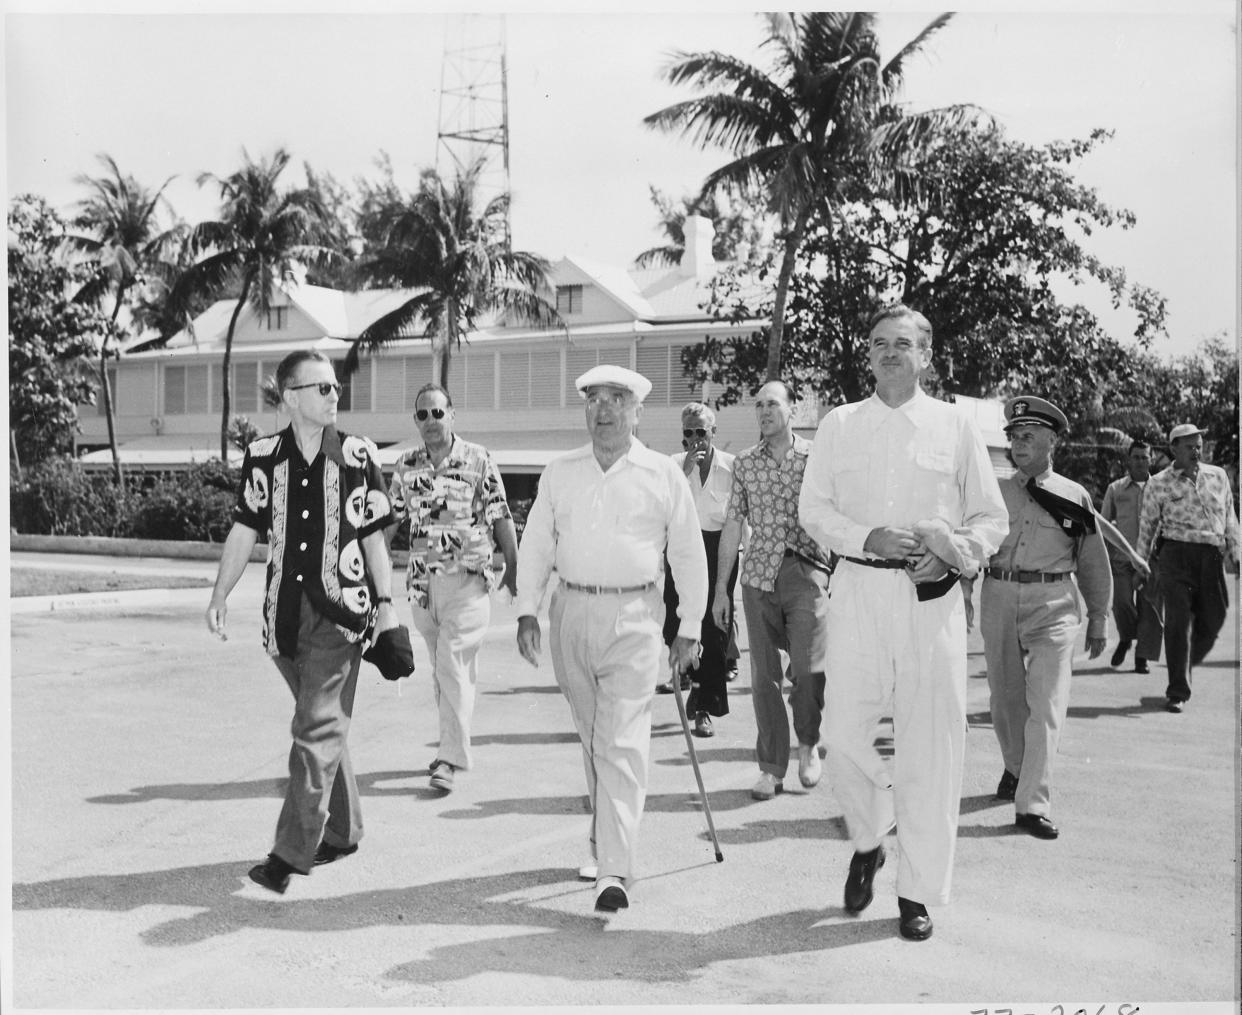 President Harry S. Truman did important work as well vacationed in Key West during his visits.